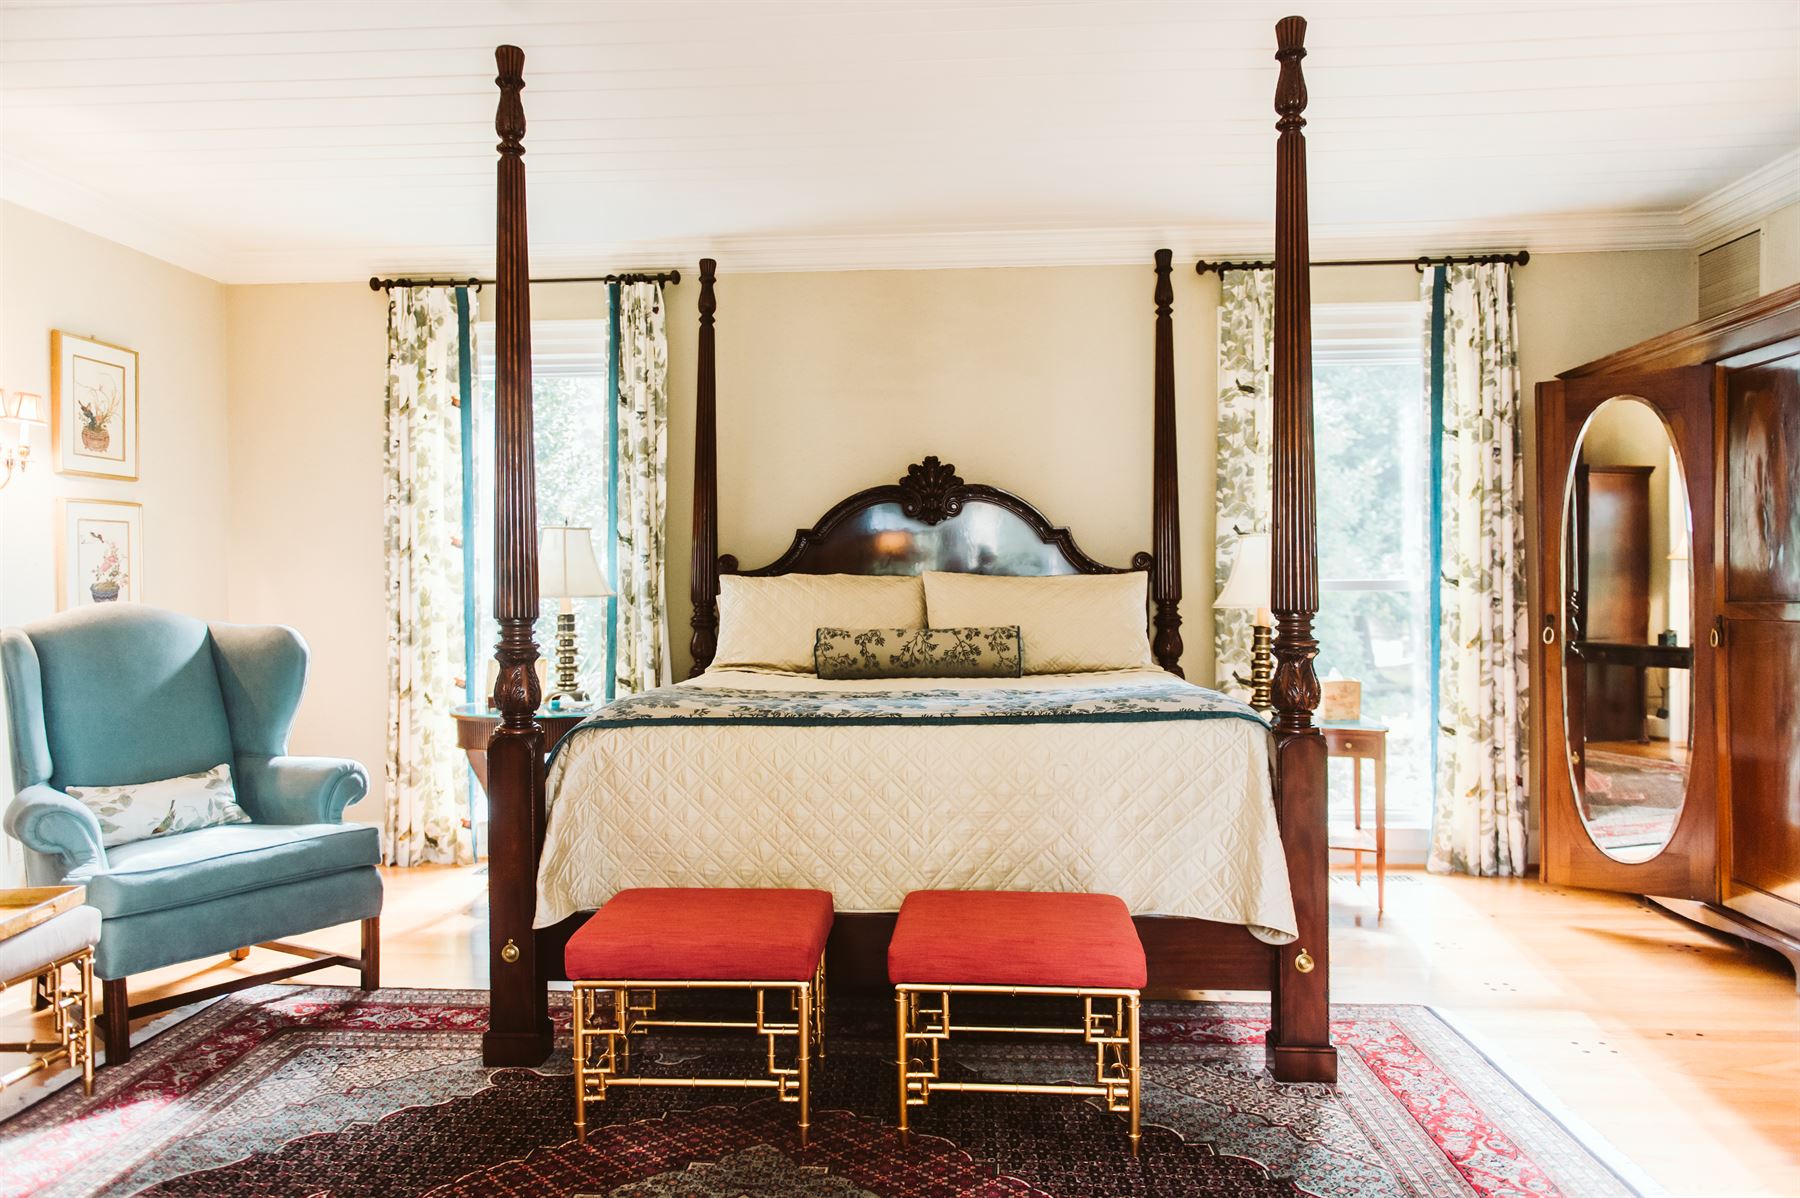 Brittain Room Bed with Stools